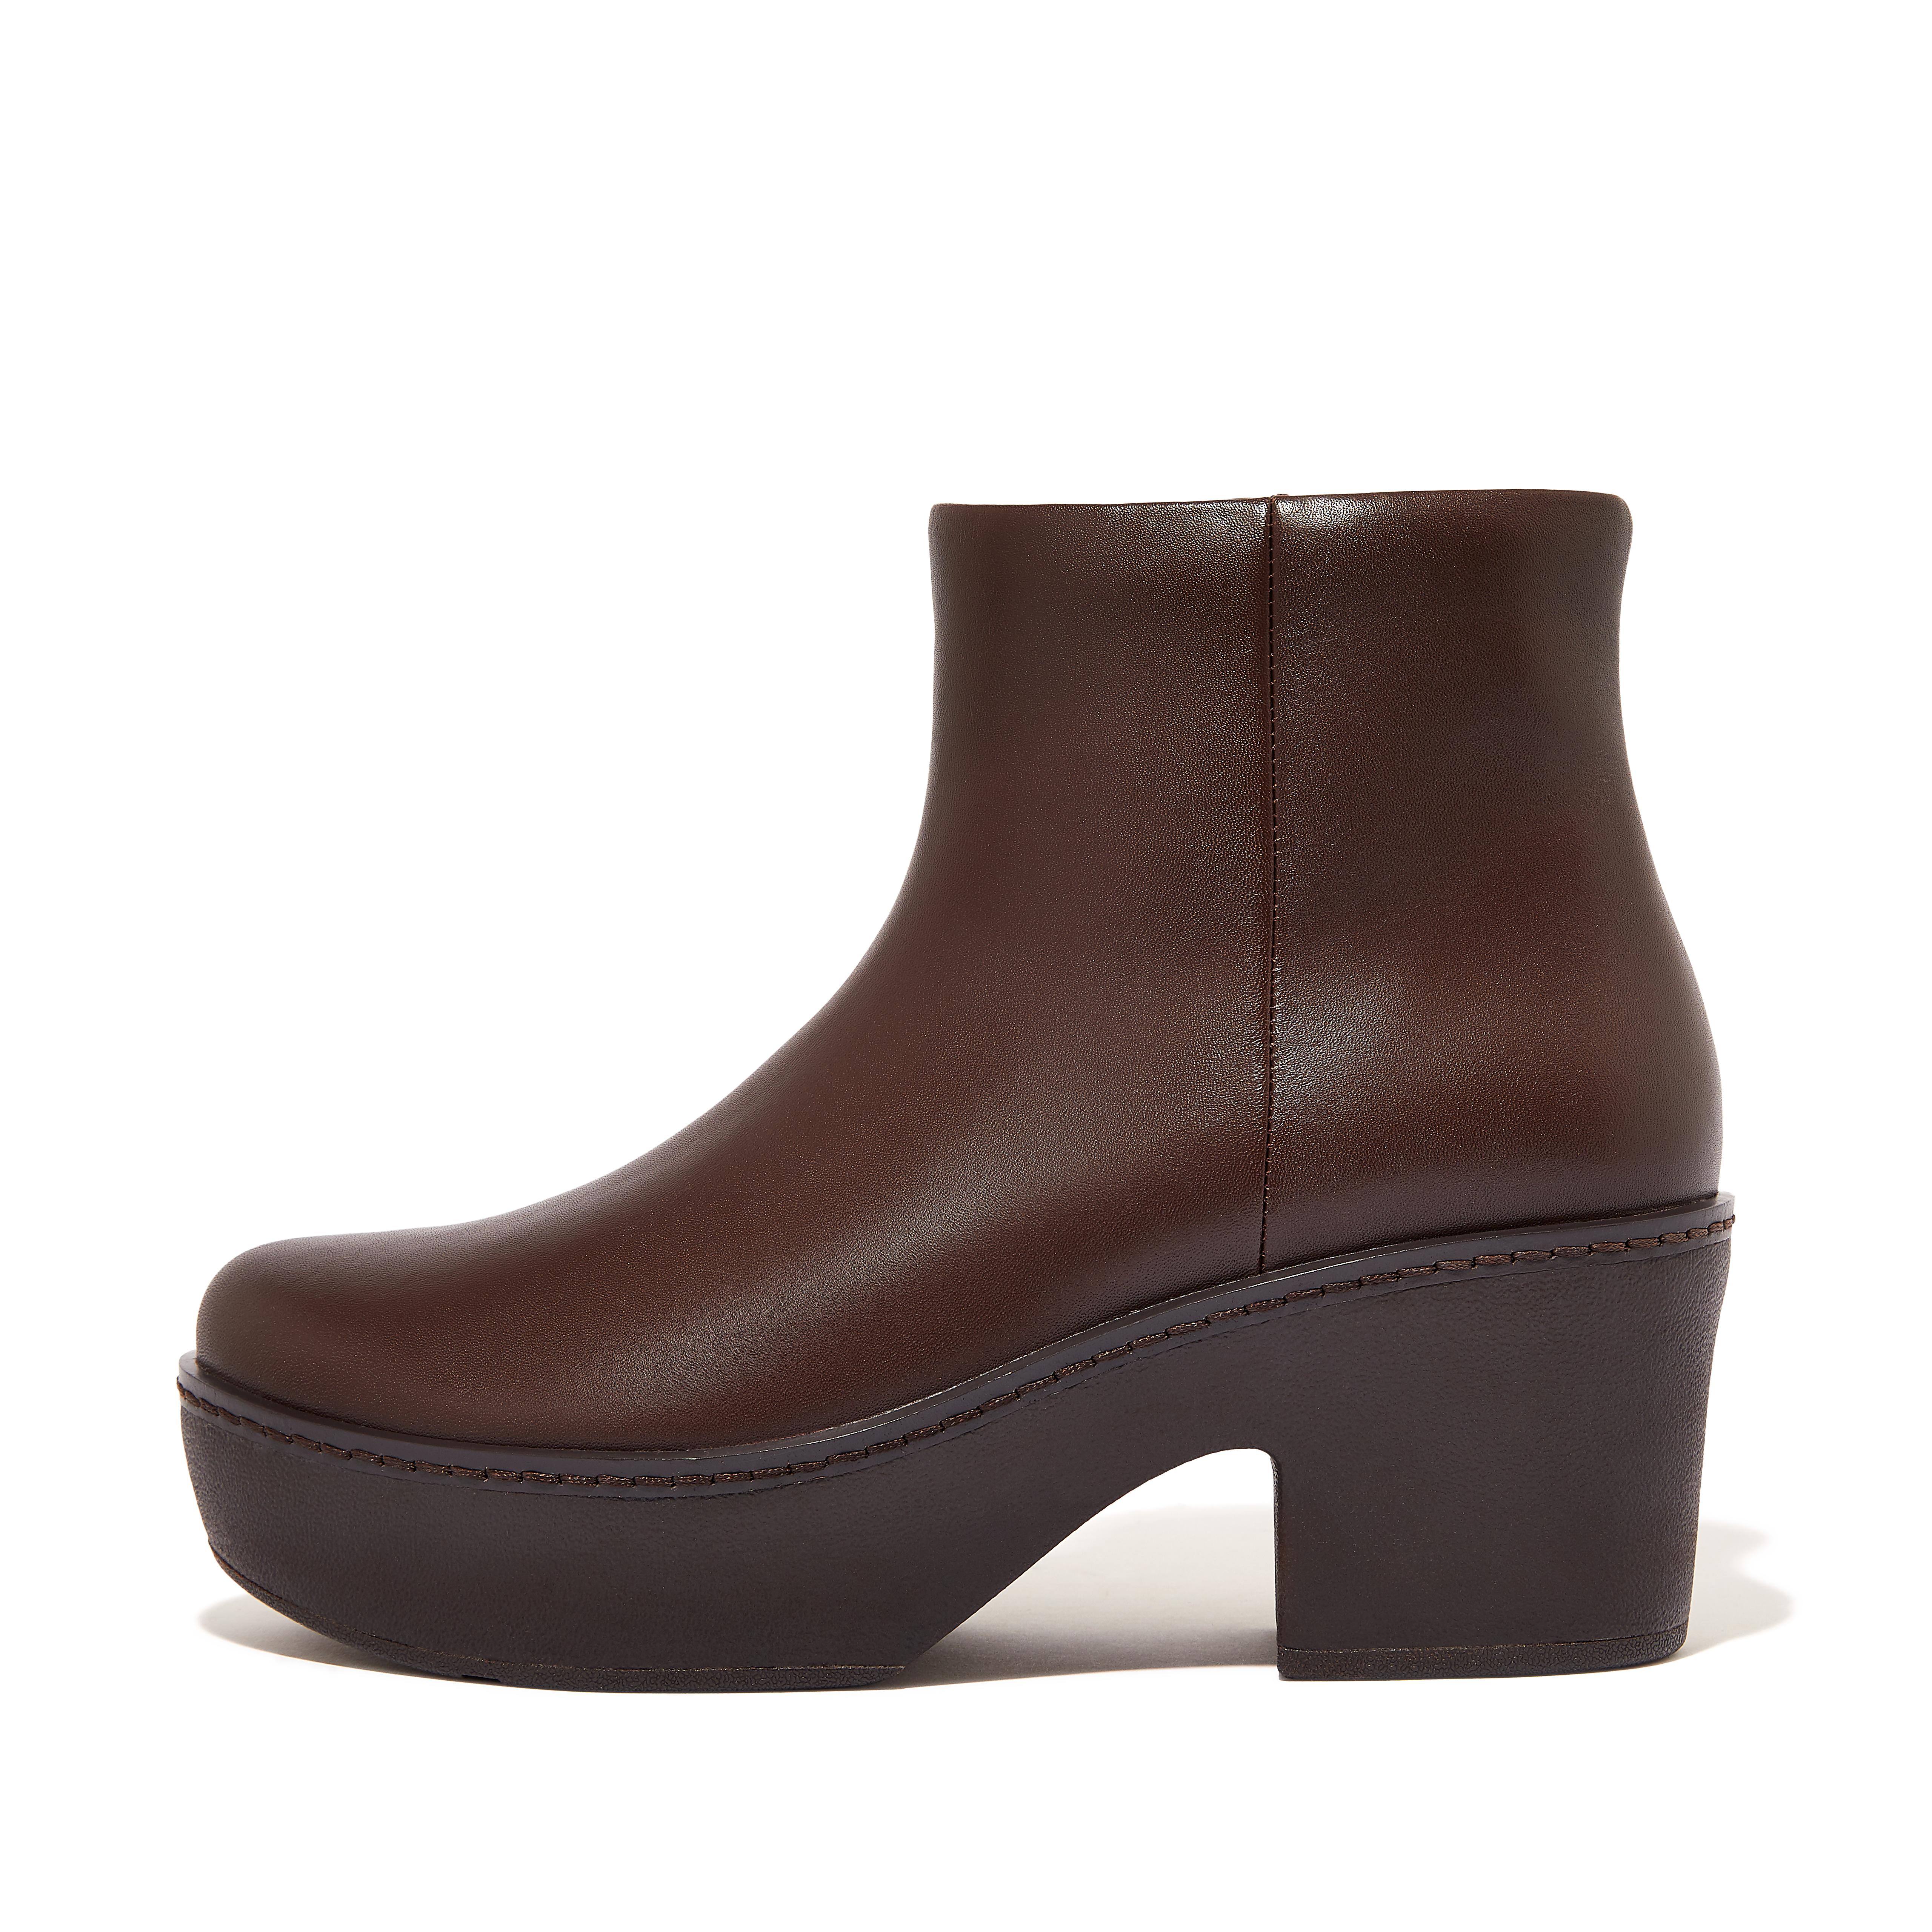 Women's Pilar Leather Platform Ankle Boots | FitFlop US